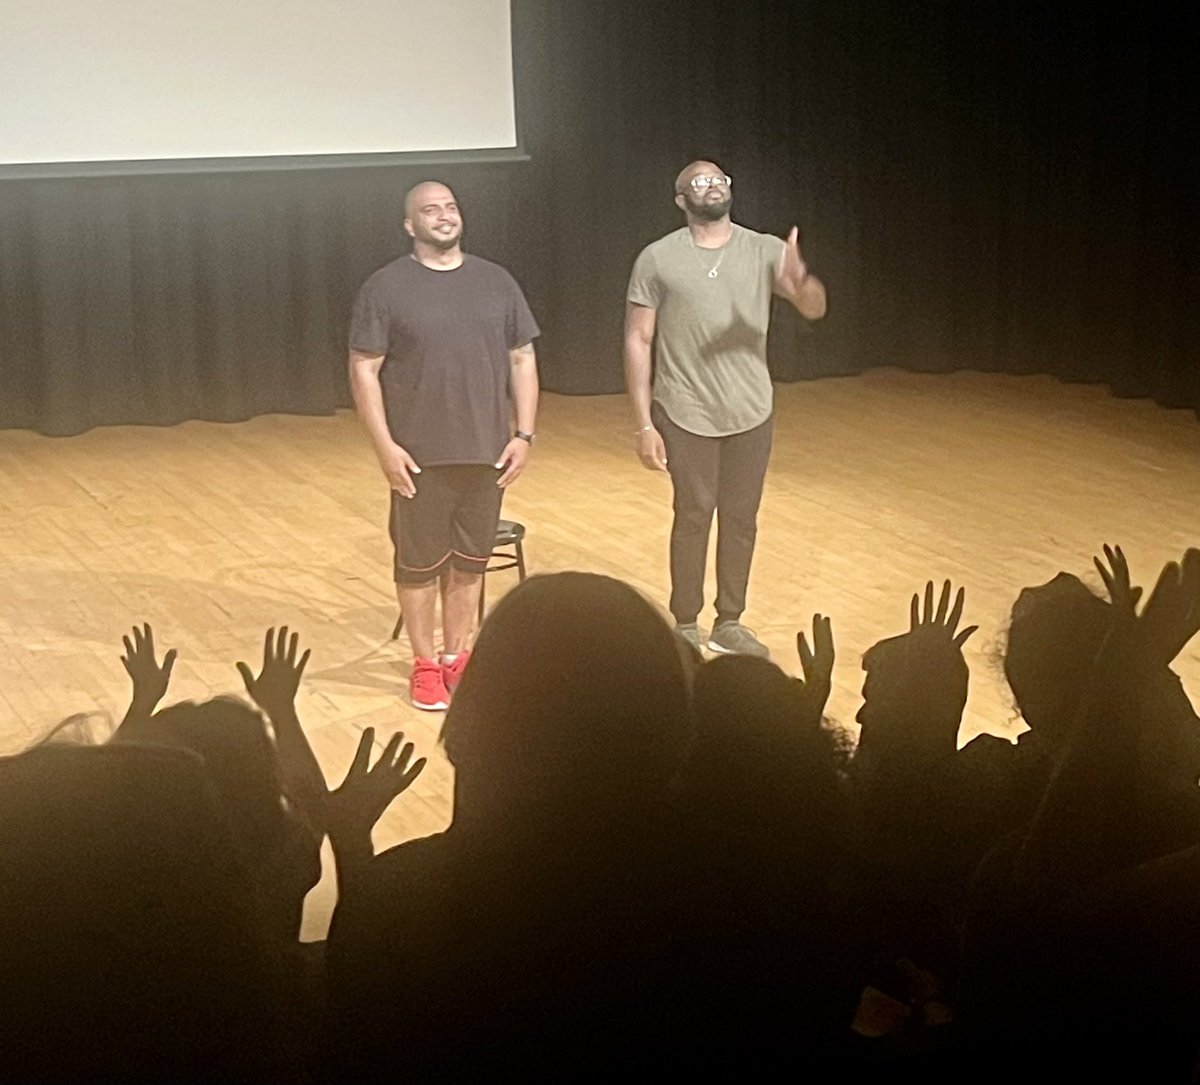 @RinkooBarpaga Delighted audiences on at Mac arts on Monday 25Jul with preview before run @ThePleasance of Made In (India) Britain. Thank you @DanielLBailey @TyroneHuggins Matthias Andre.